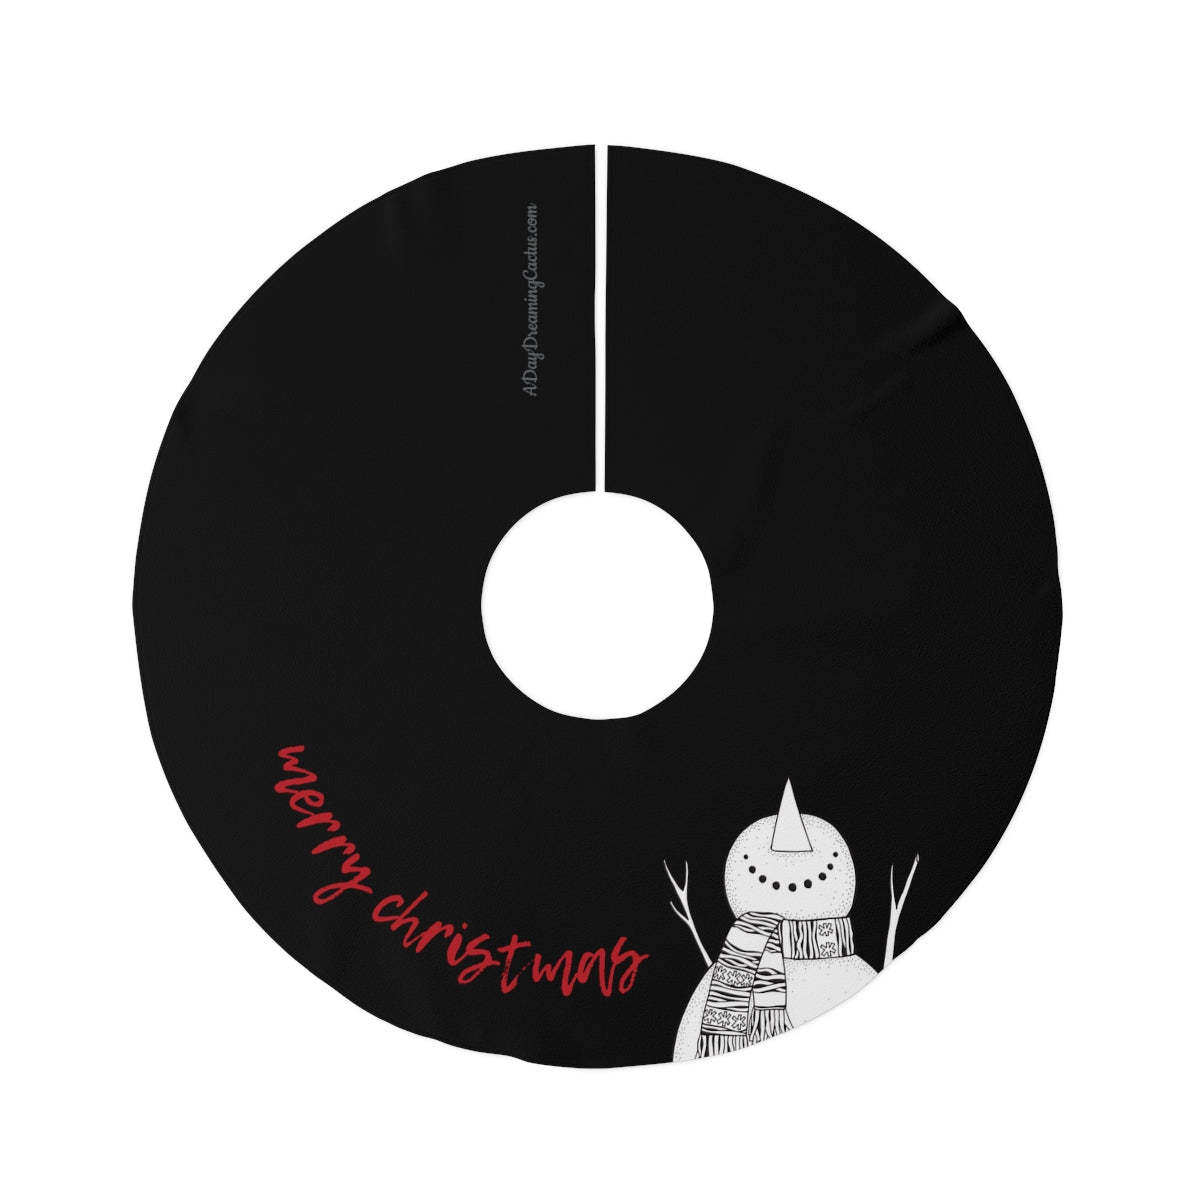 Black Red Merry Christmas with Look Up Snowman ~ Christmas Holiday Round Tree Skirt